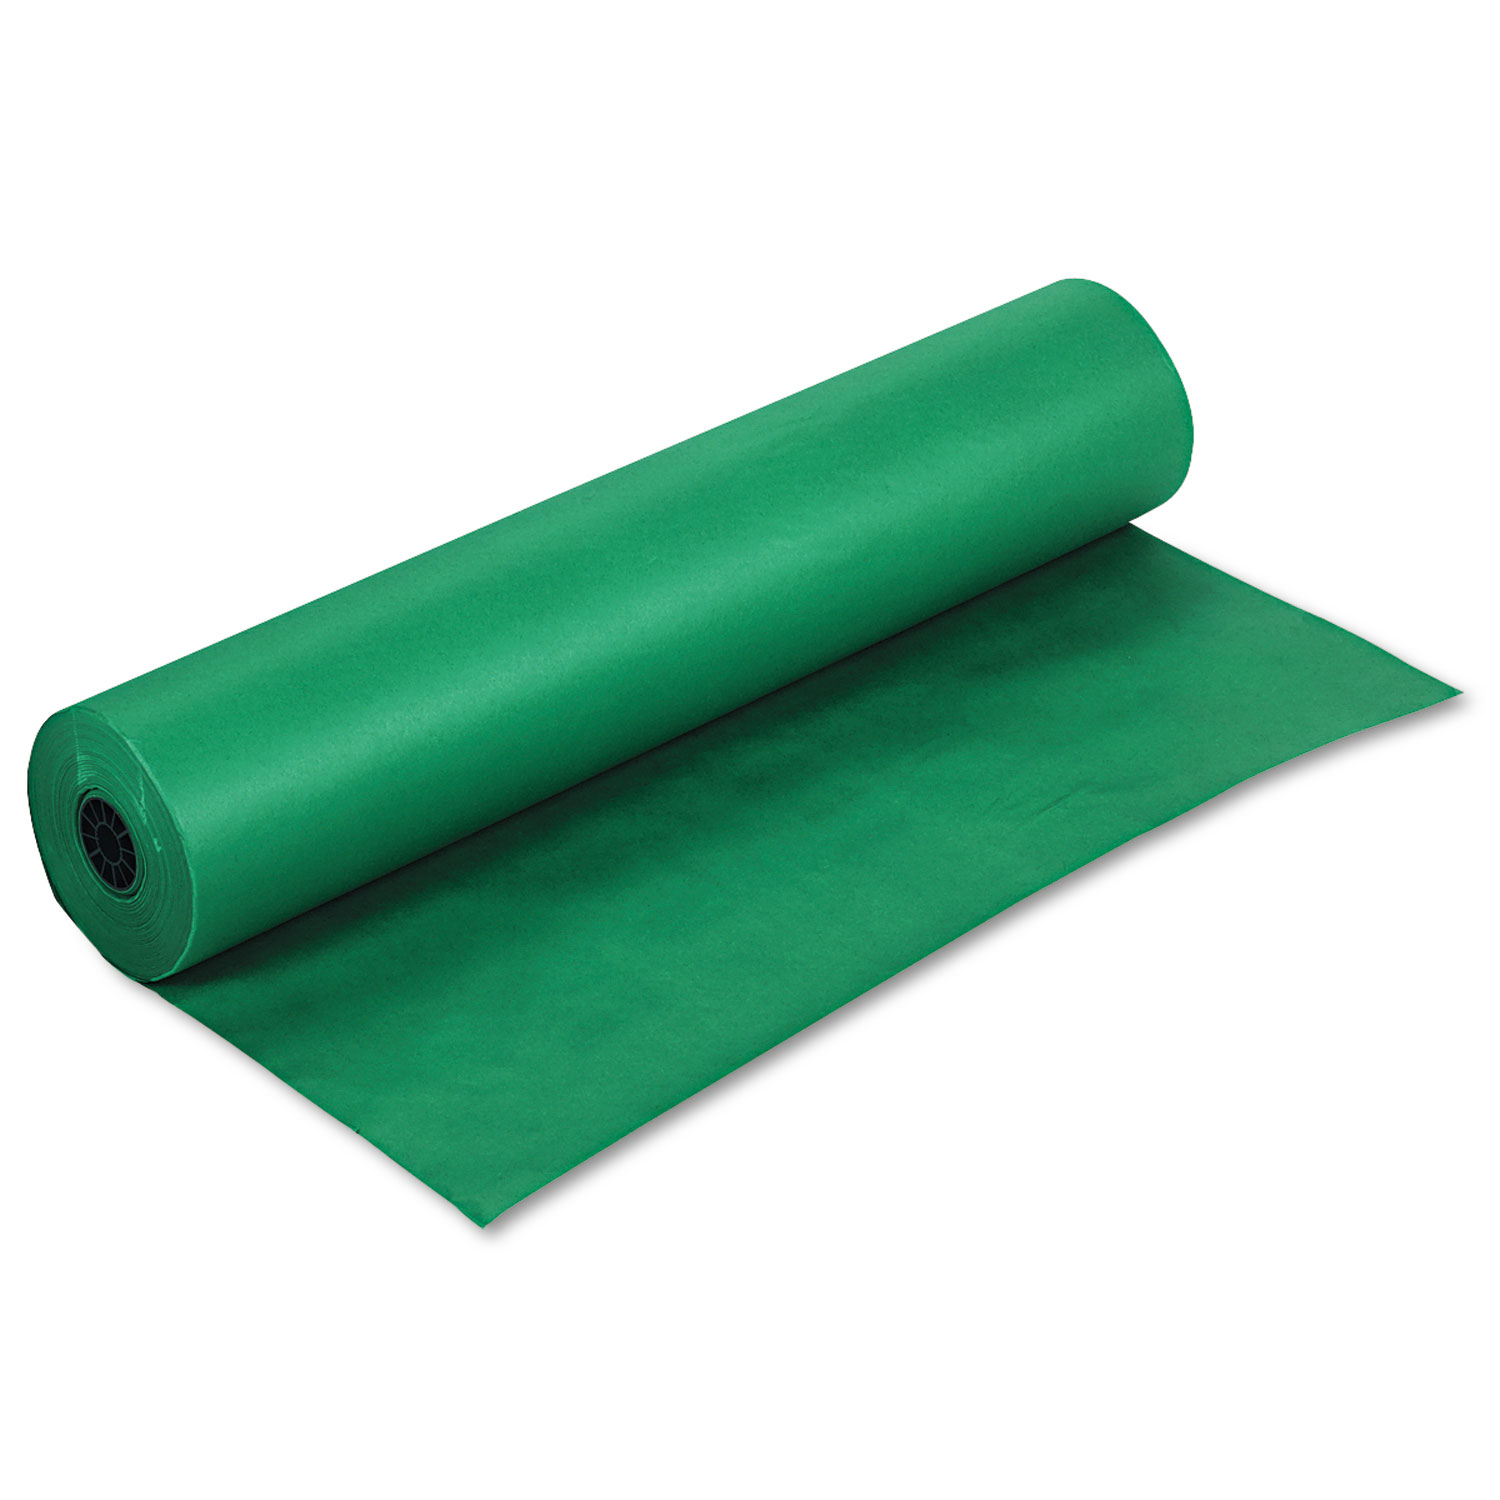 Pacon PAC63140 Rainbow Duo-Finish Colored Kraft Paper, 35 lbs., 36" x 1000 ft, Emerald